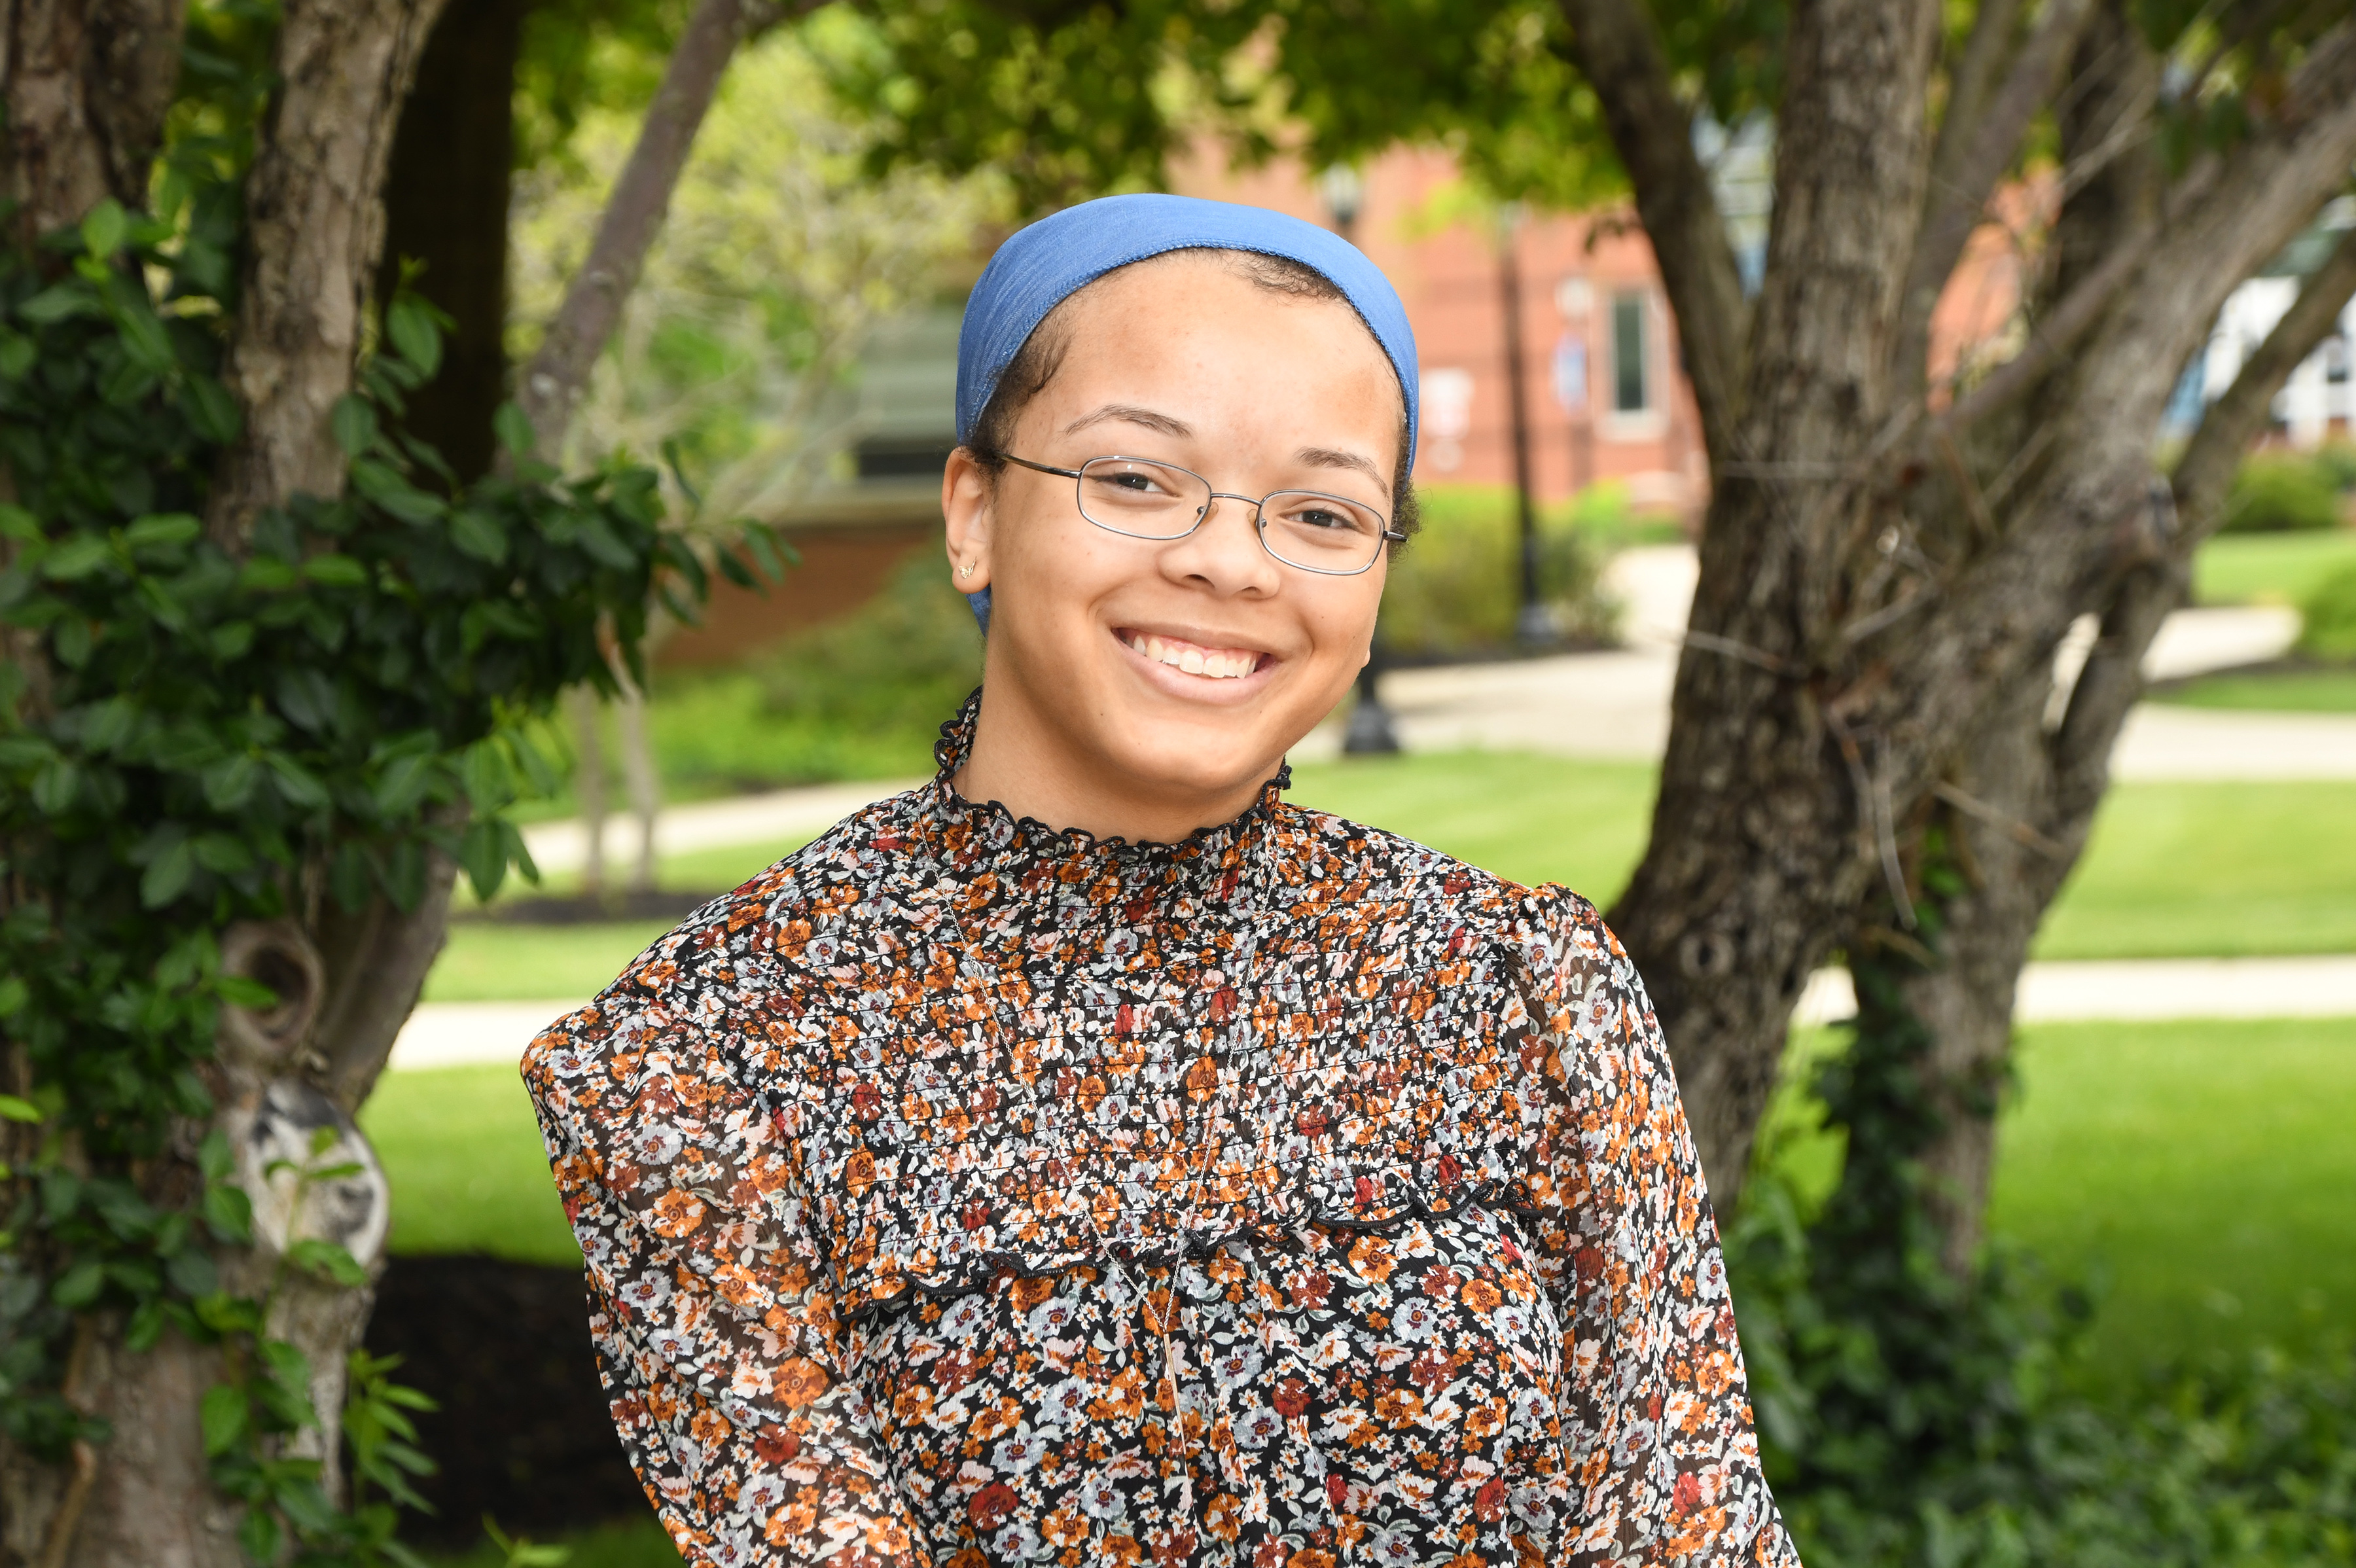 Brandi Nichols, a 4.0 GPA New Media in Arts major, took advantage of a number of opportunities outside the classroom to help her determine her career path. After her May 14 graduation, she will work for IBM in Austin, Texas.